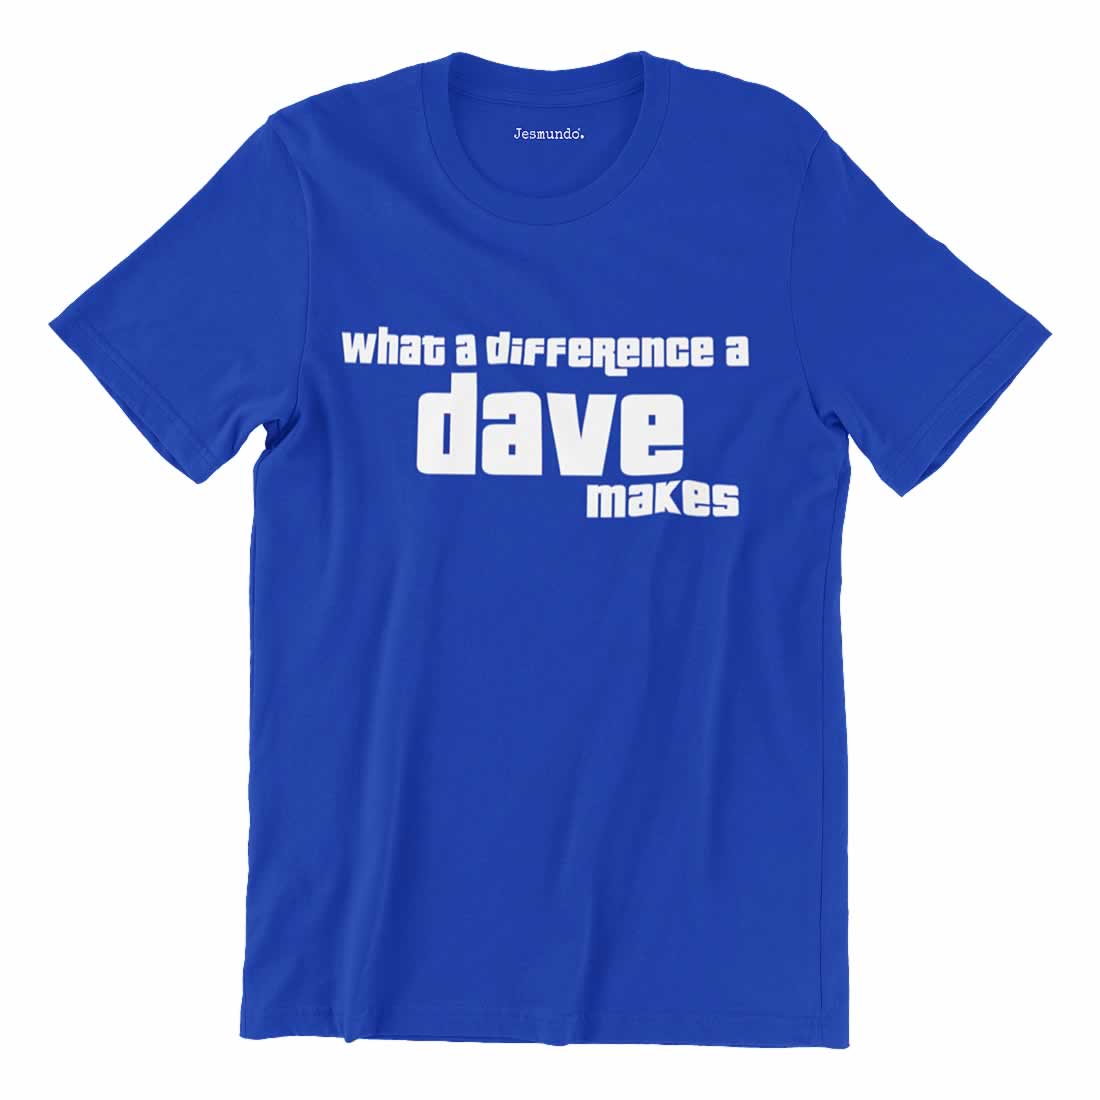 What a difference a Dave makes T Shirt